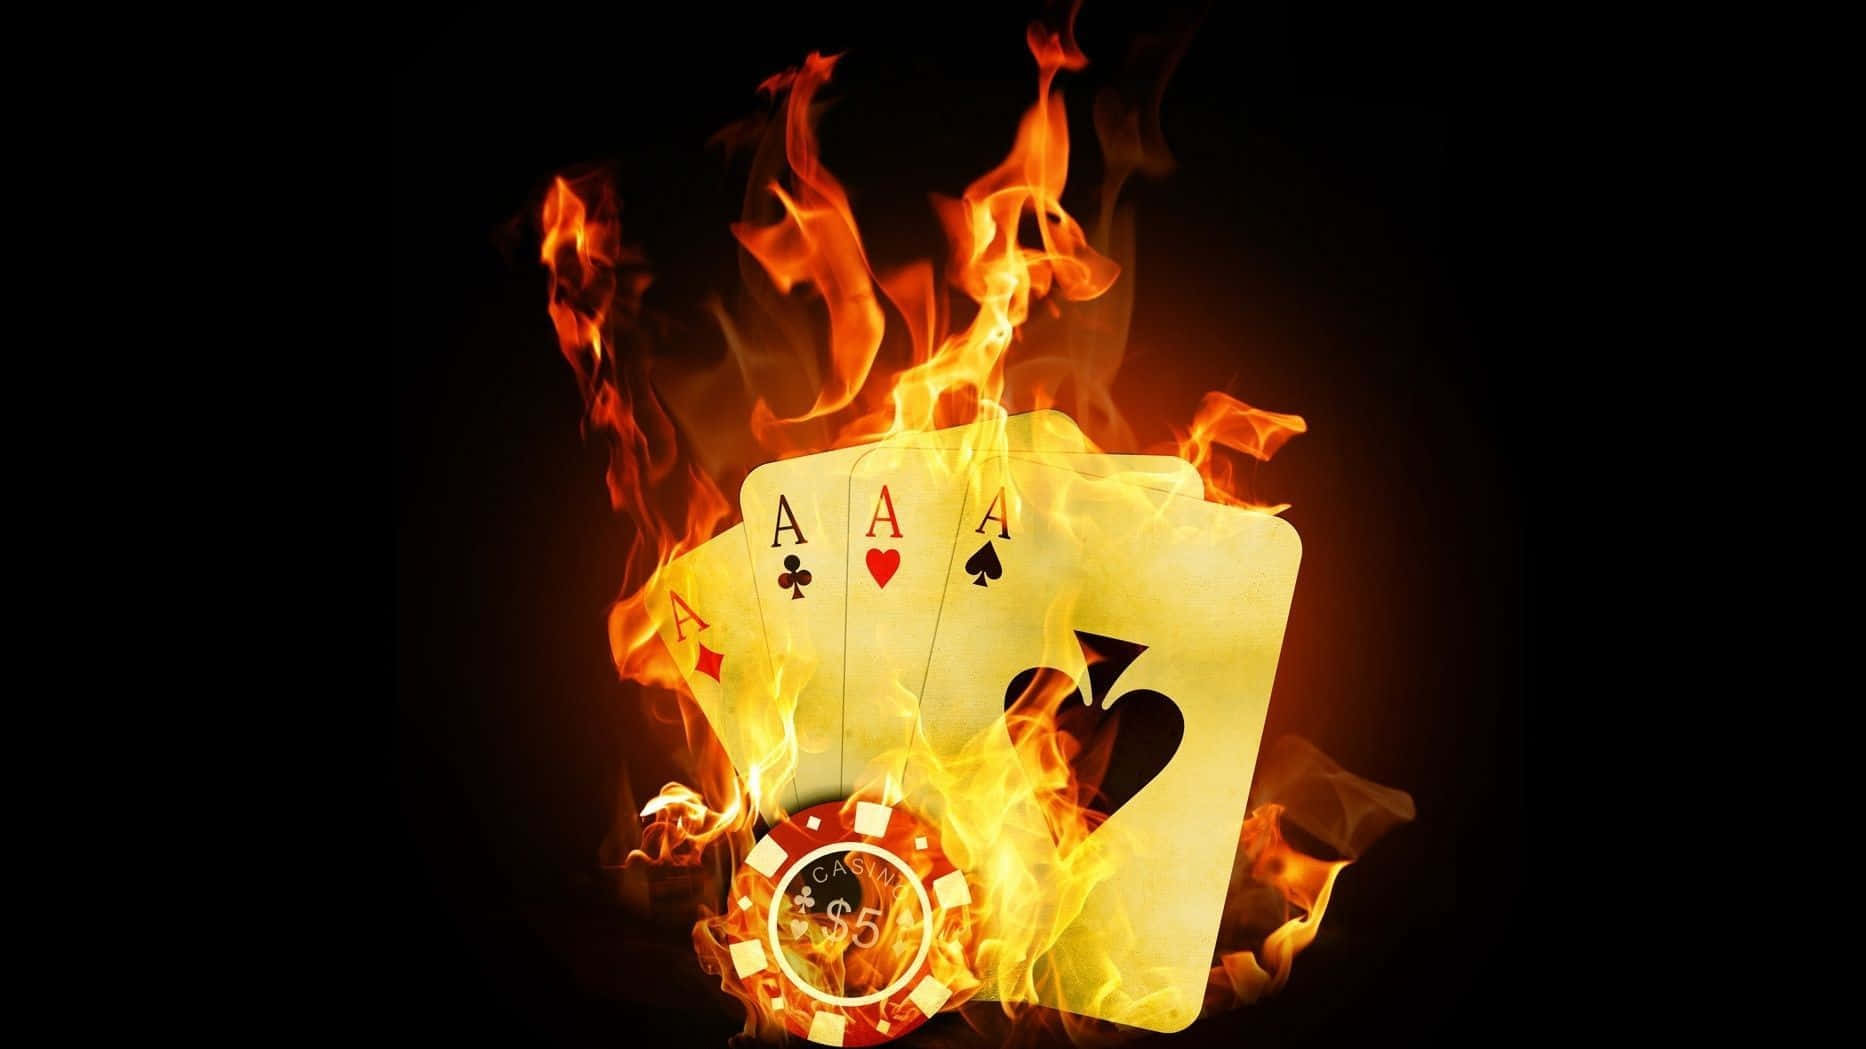 A Poker Card With A Flame On It